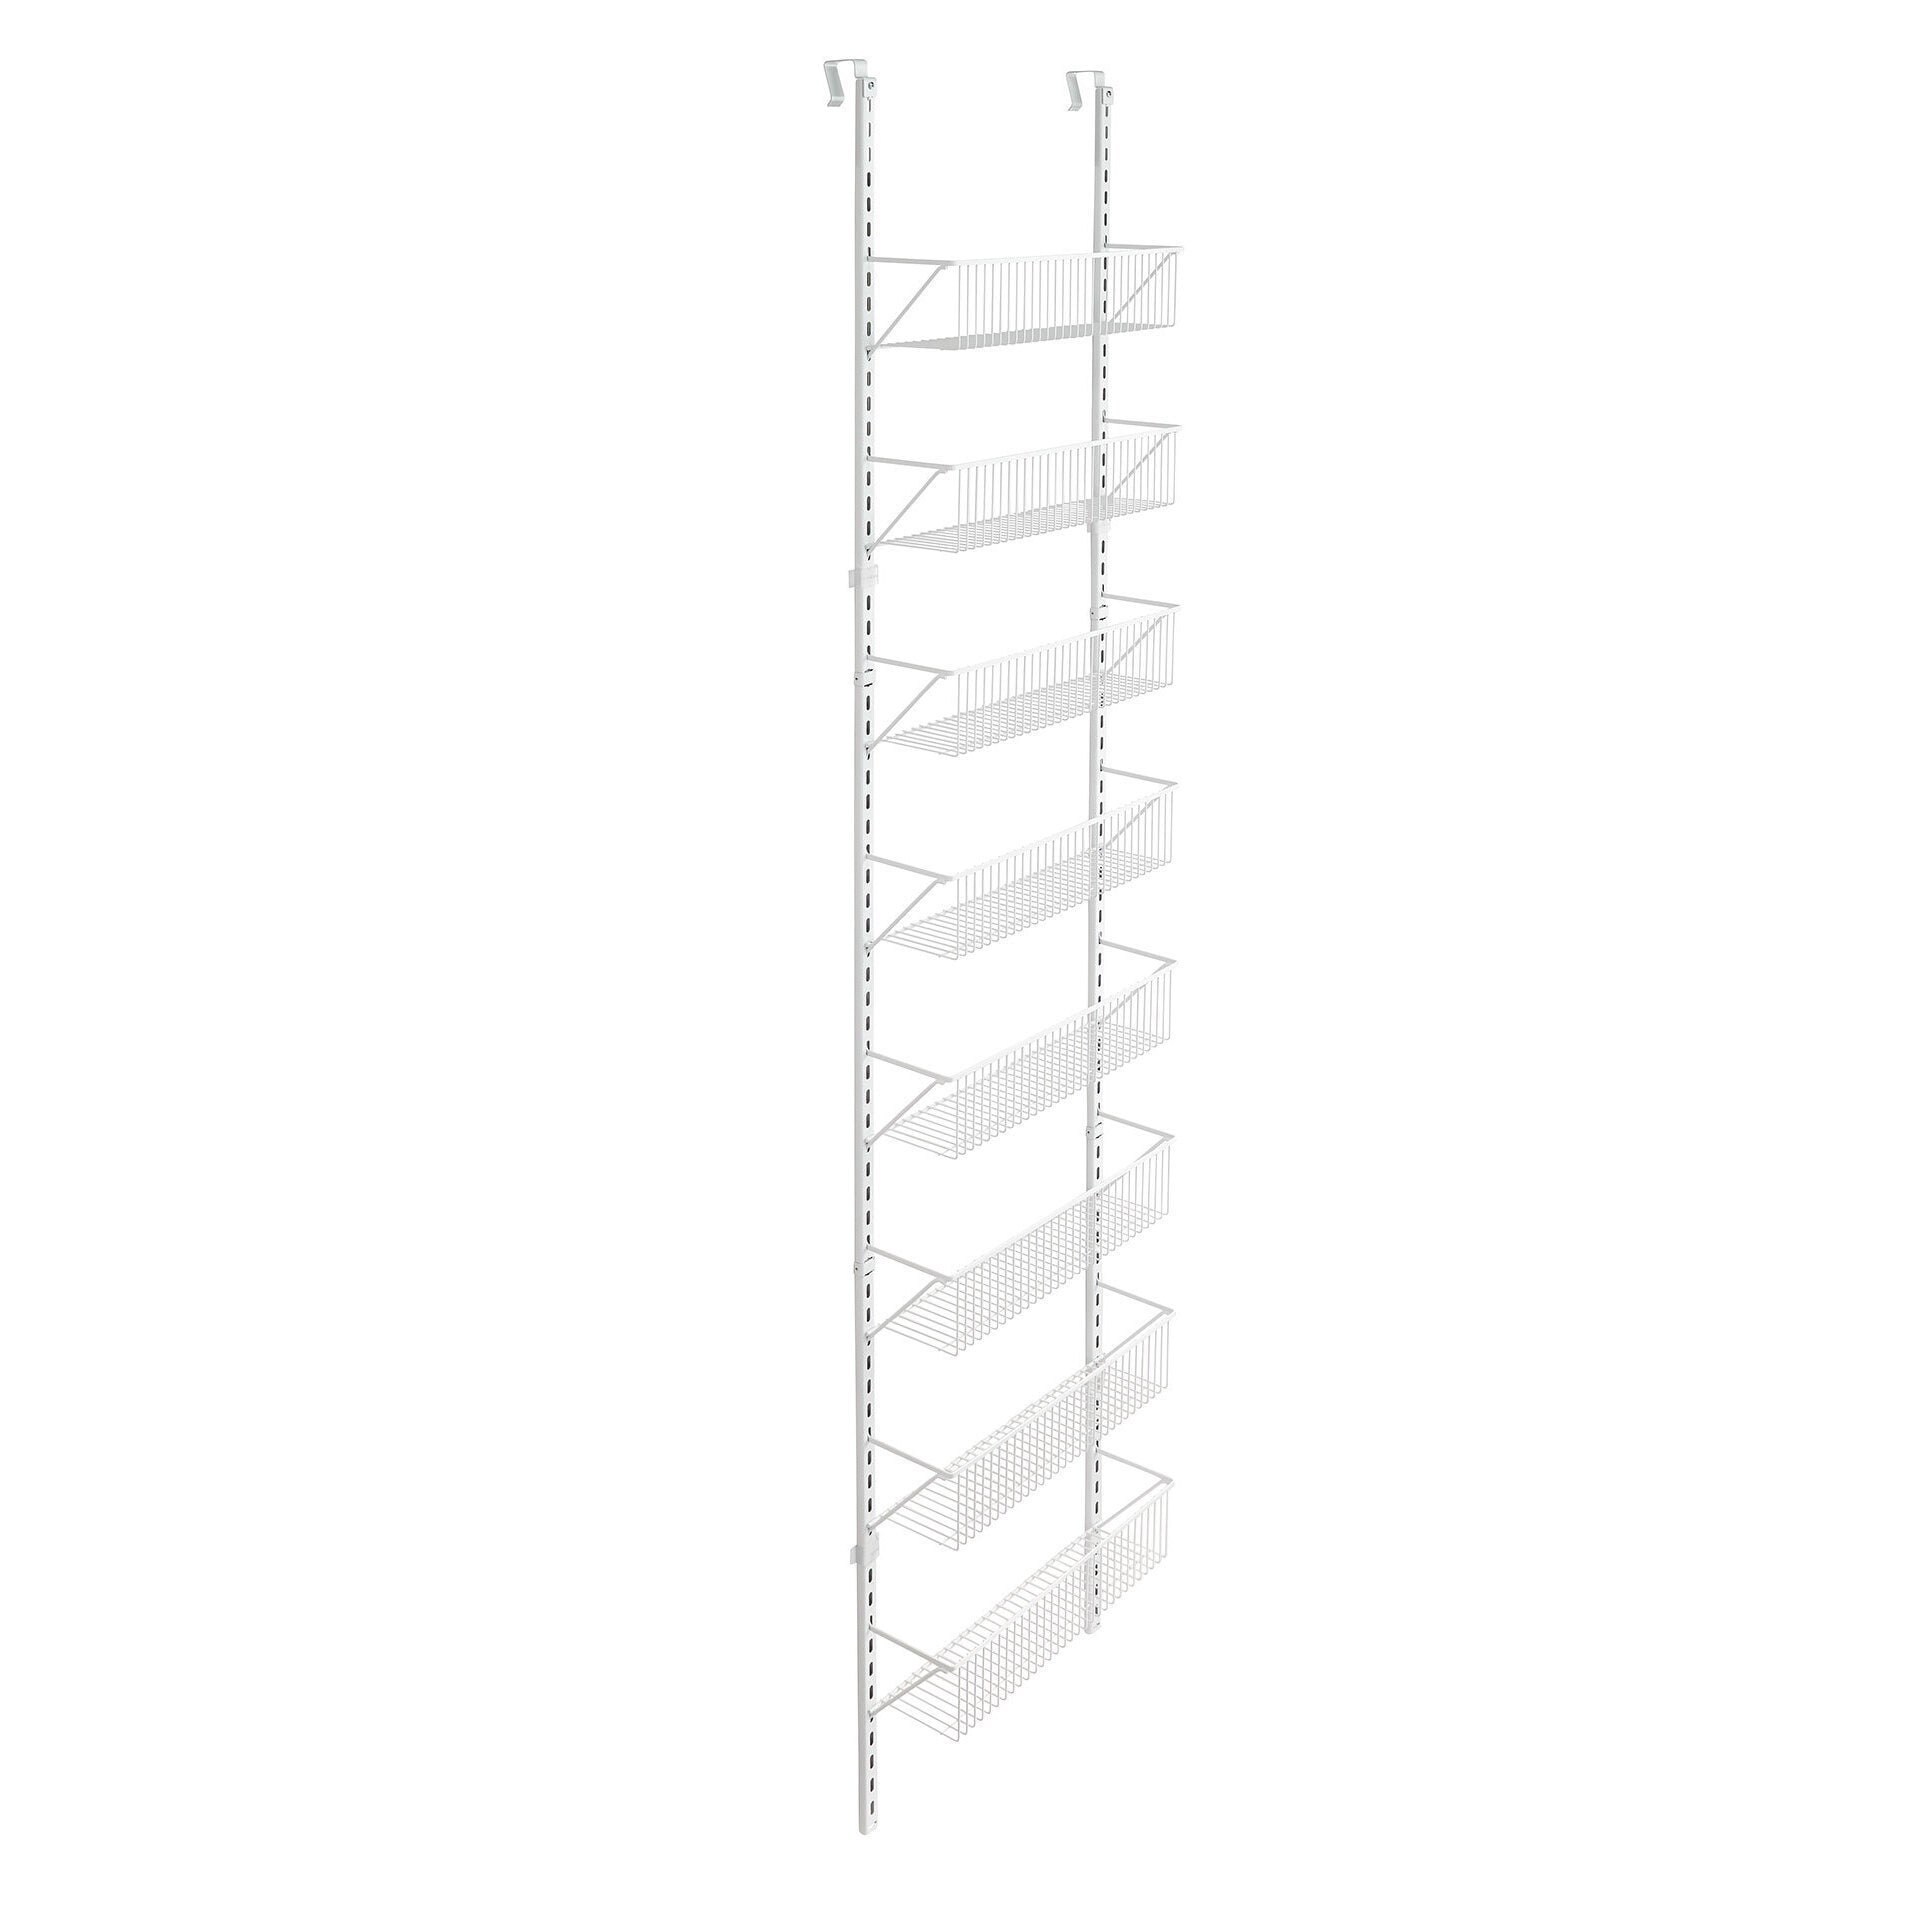 https://ak1.ostkcdn.com/images/products/is/images/direct/40ce120a8fcbbe95a27fd63534e129a3782f66fe/ClosetMaid-Adjustable-Hanging-Basket-Organizer.jpg